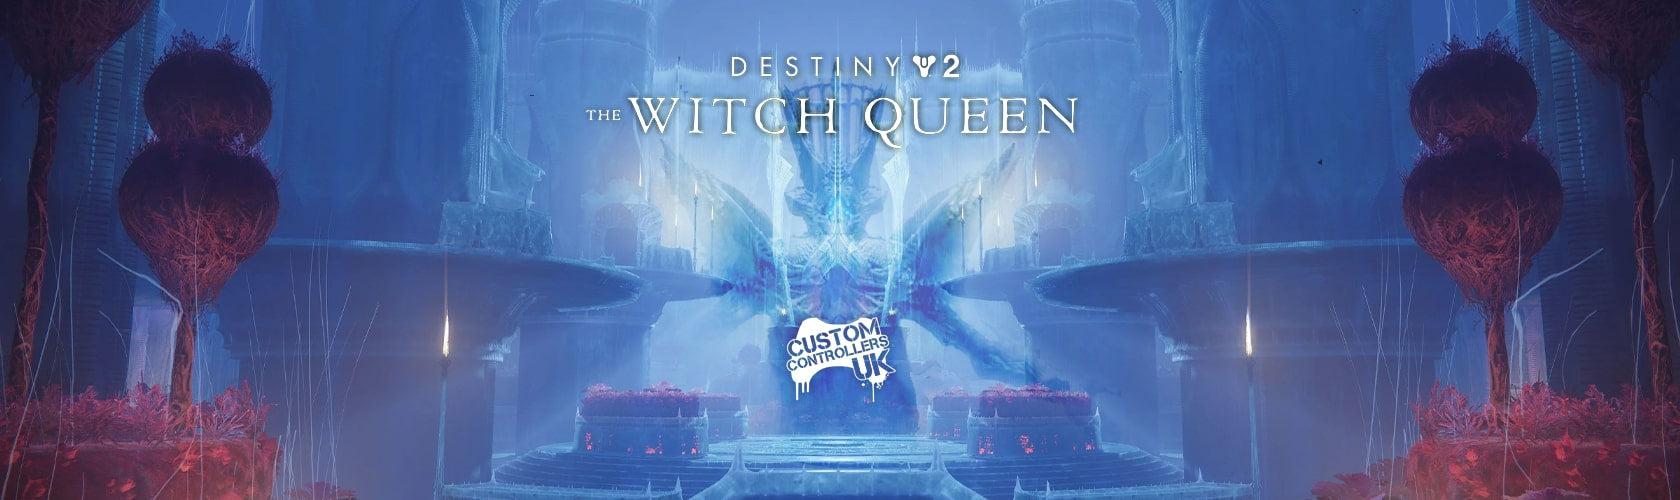 Destiny 2 The Witch Queen Review – Destiny's Greatest Expansion so far?-Custom Controllers UK